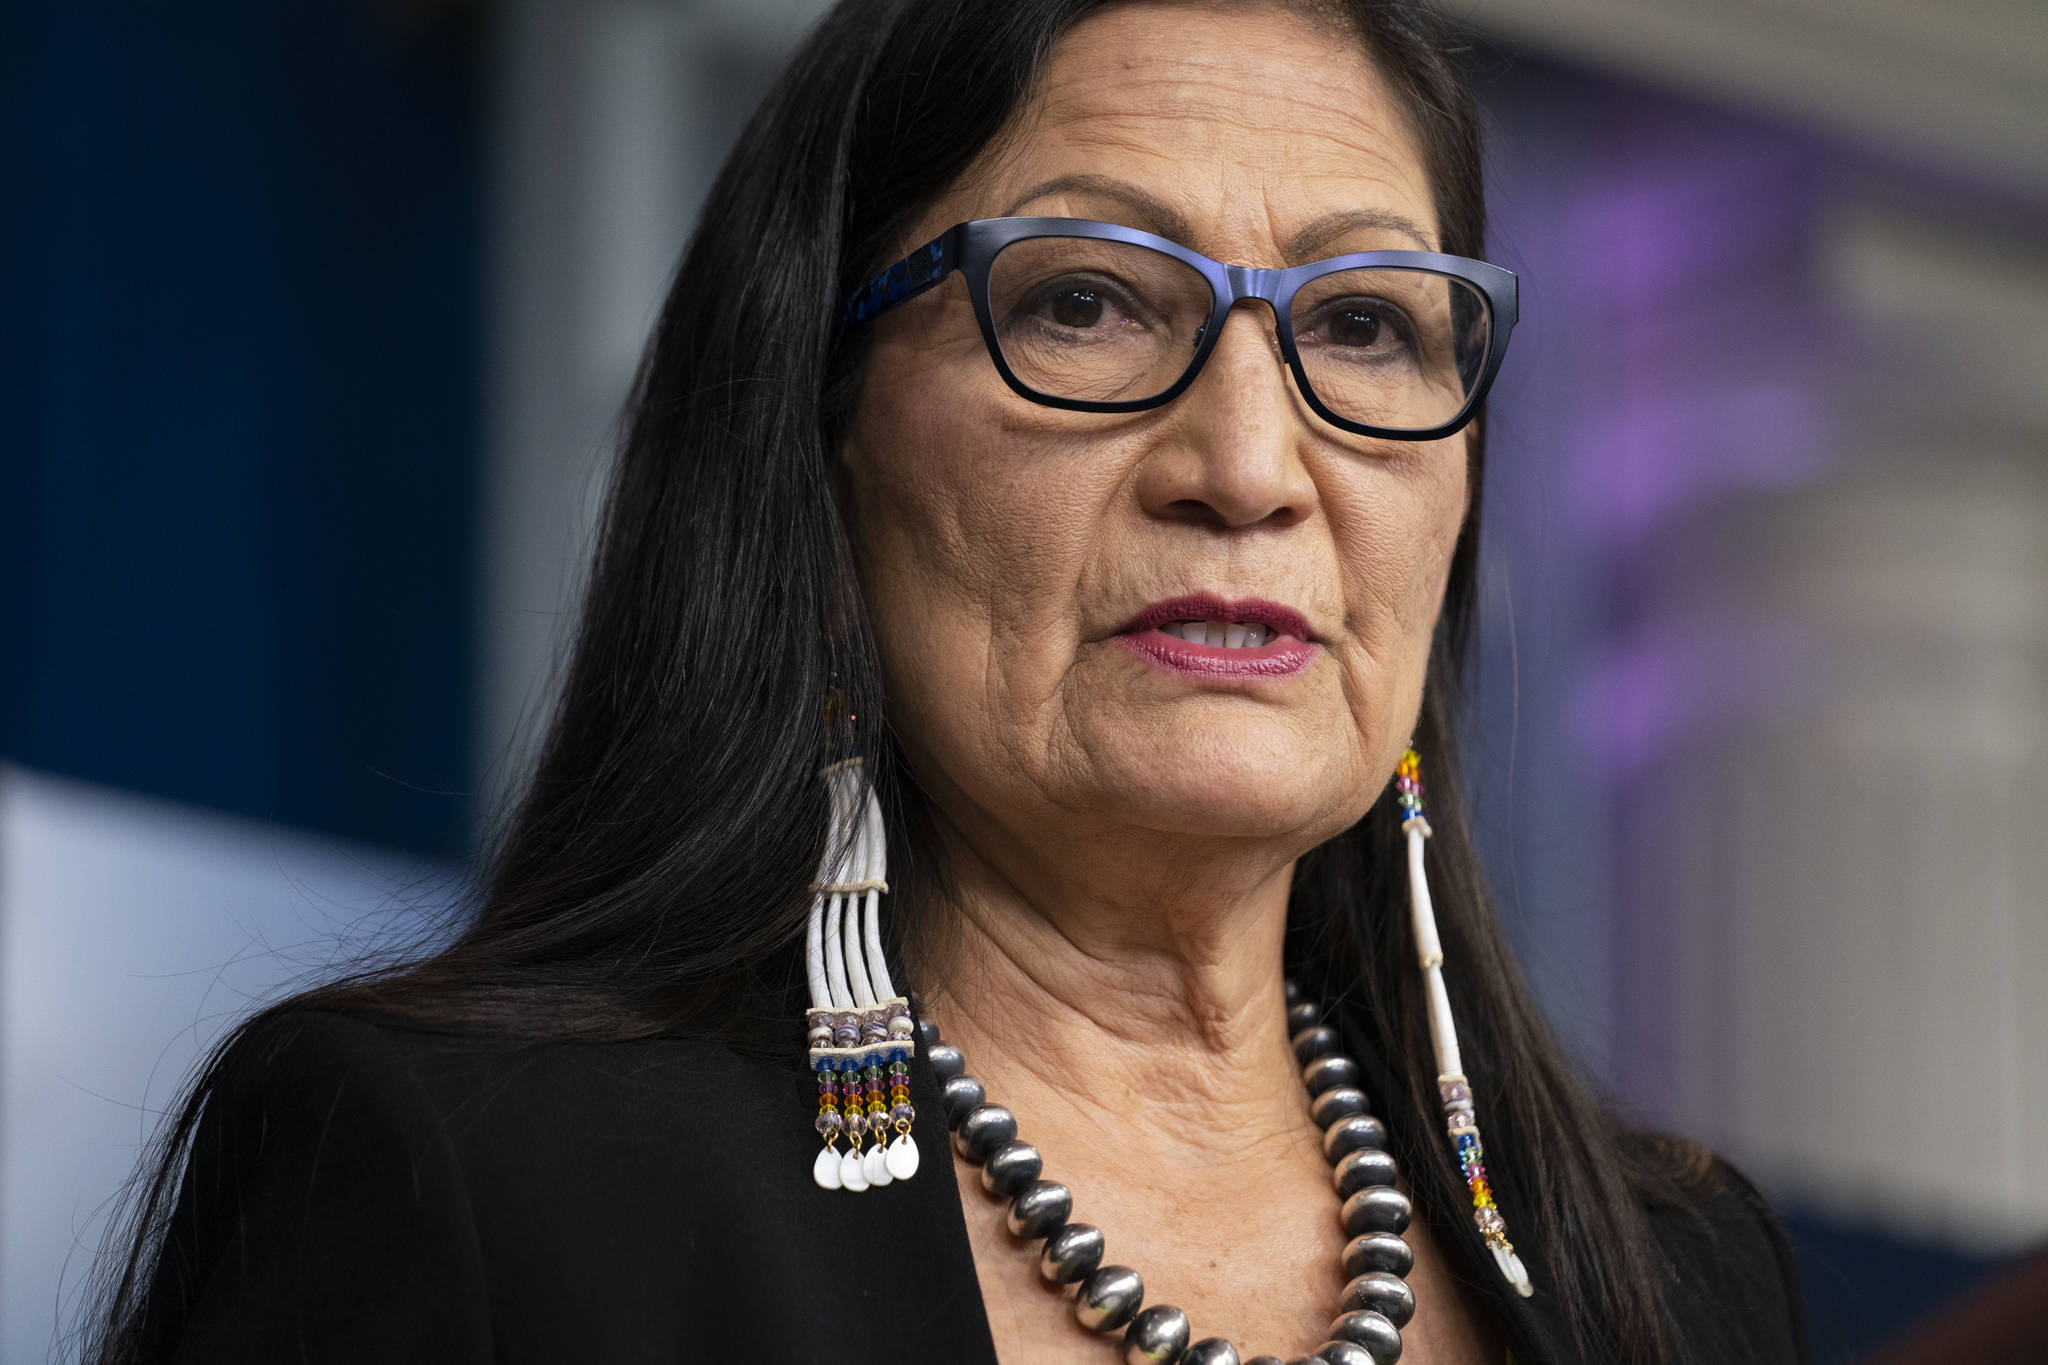 AP Photo / Evan Vucci 
Interior Secretary Deb Haaland speaks during a news briefing at the White House in Washington. On Tuesday, June 22, 2021, Haaland and other federal officials are expected to announce steps that the federal government plans to take to reconcile the legacy of boarding school policies on Indigenous families and communities across the U.S.